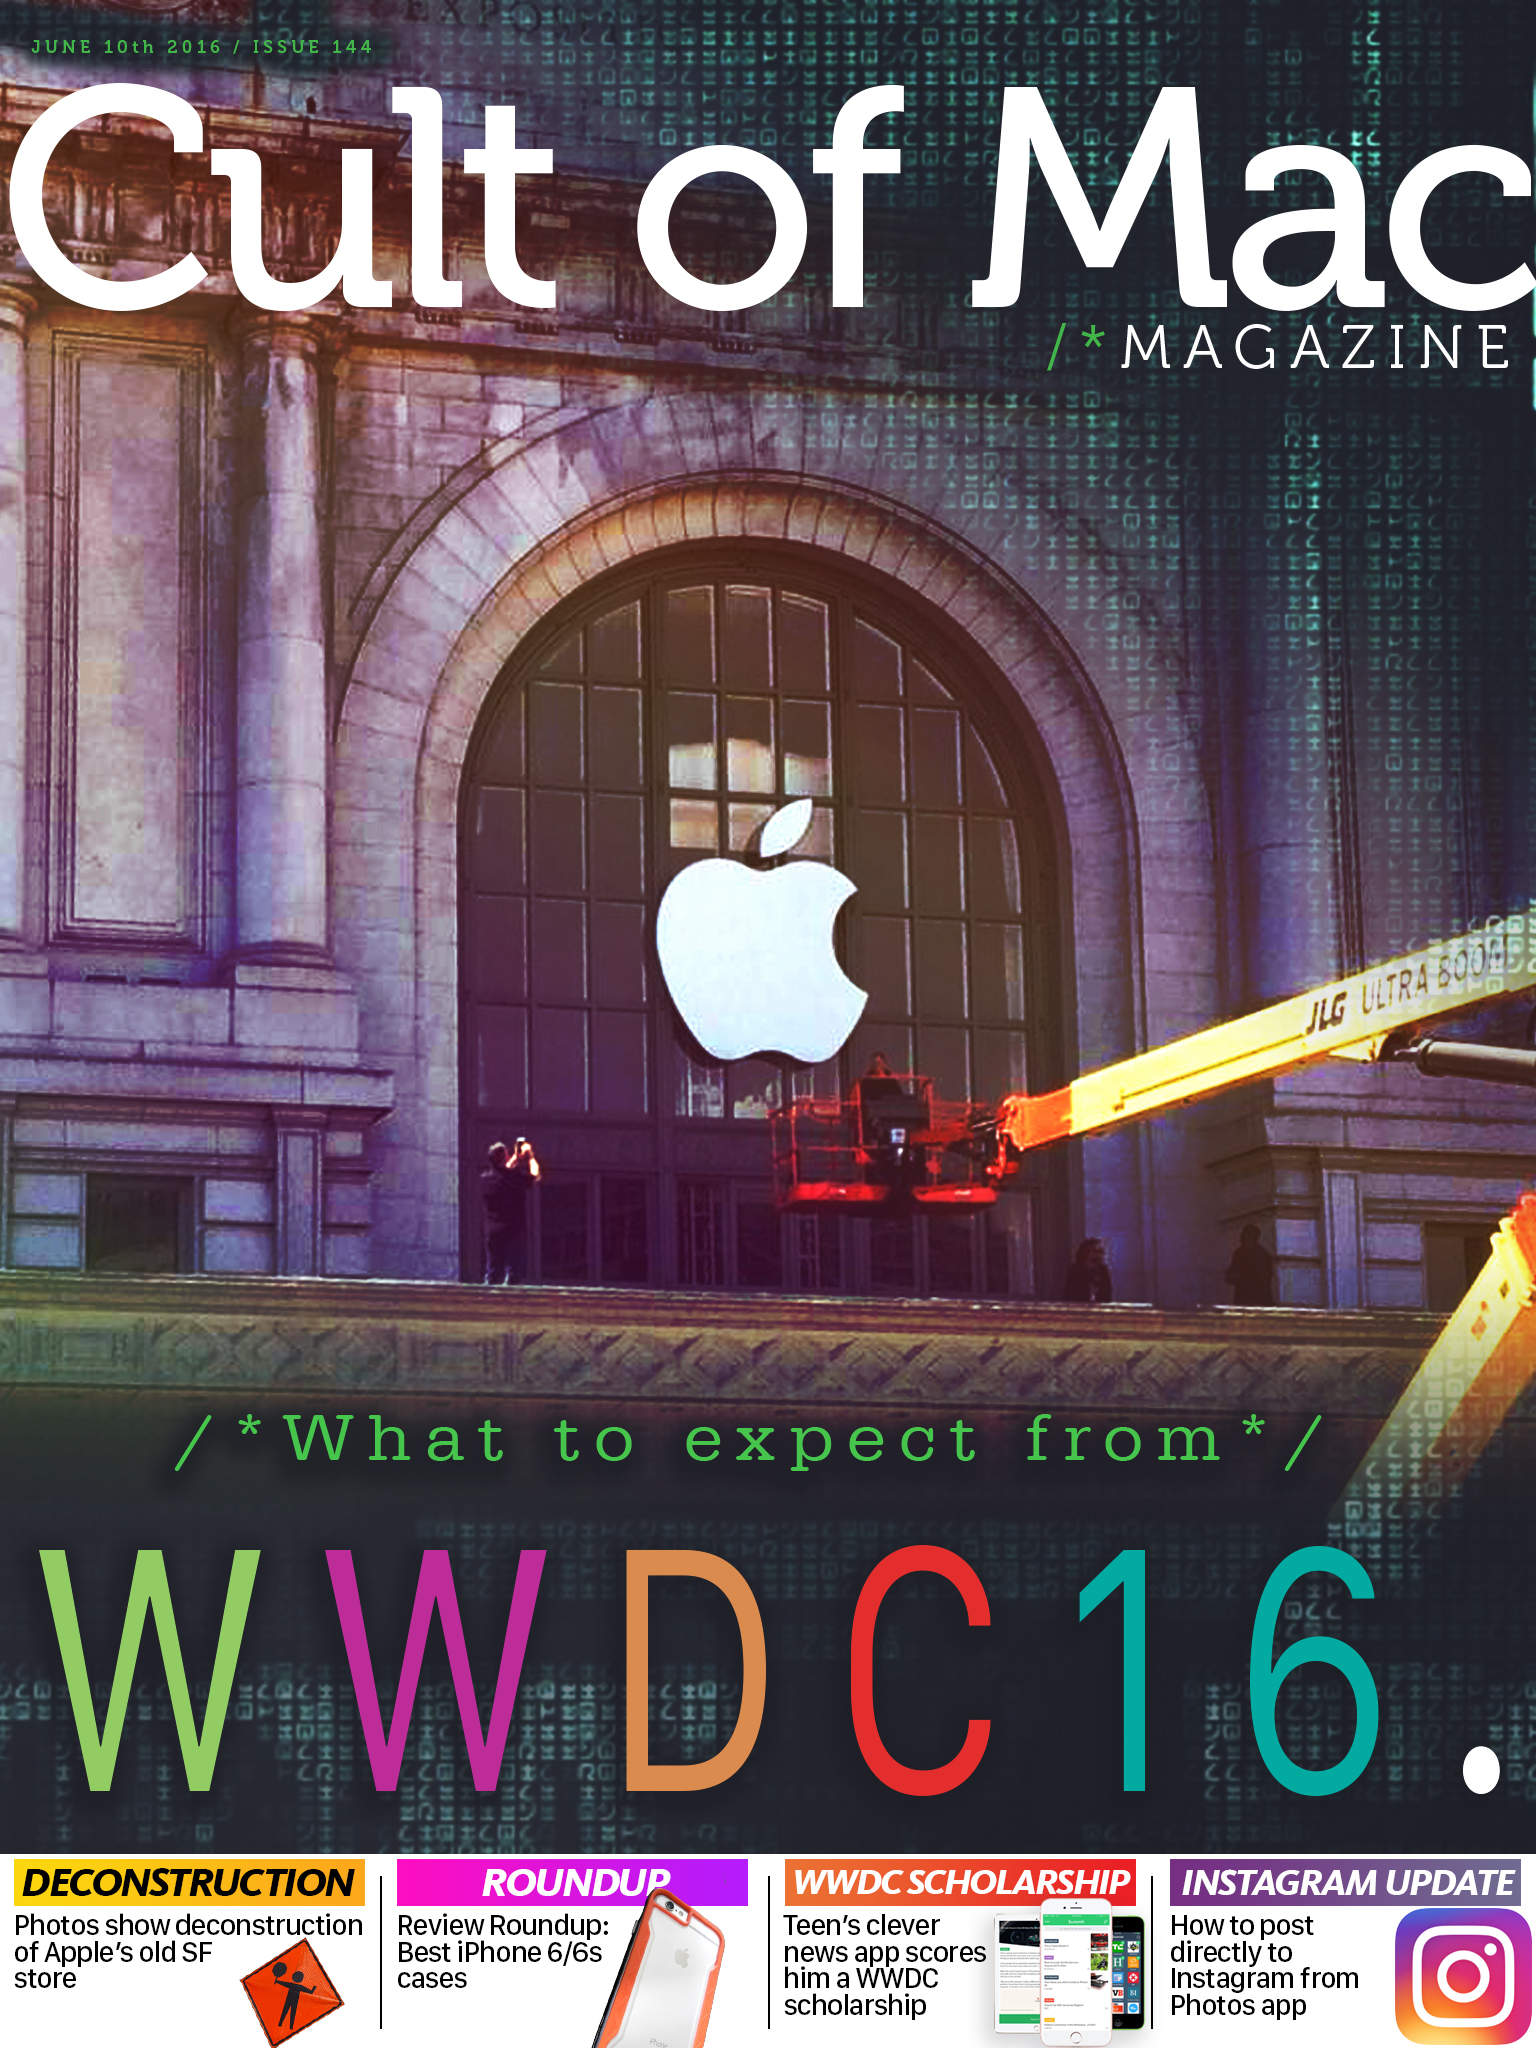 The Worldwide Developers Conference 2016 promises to be huge.